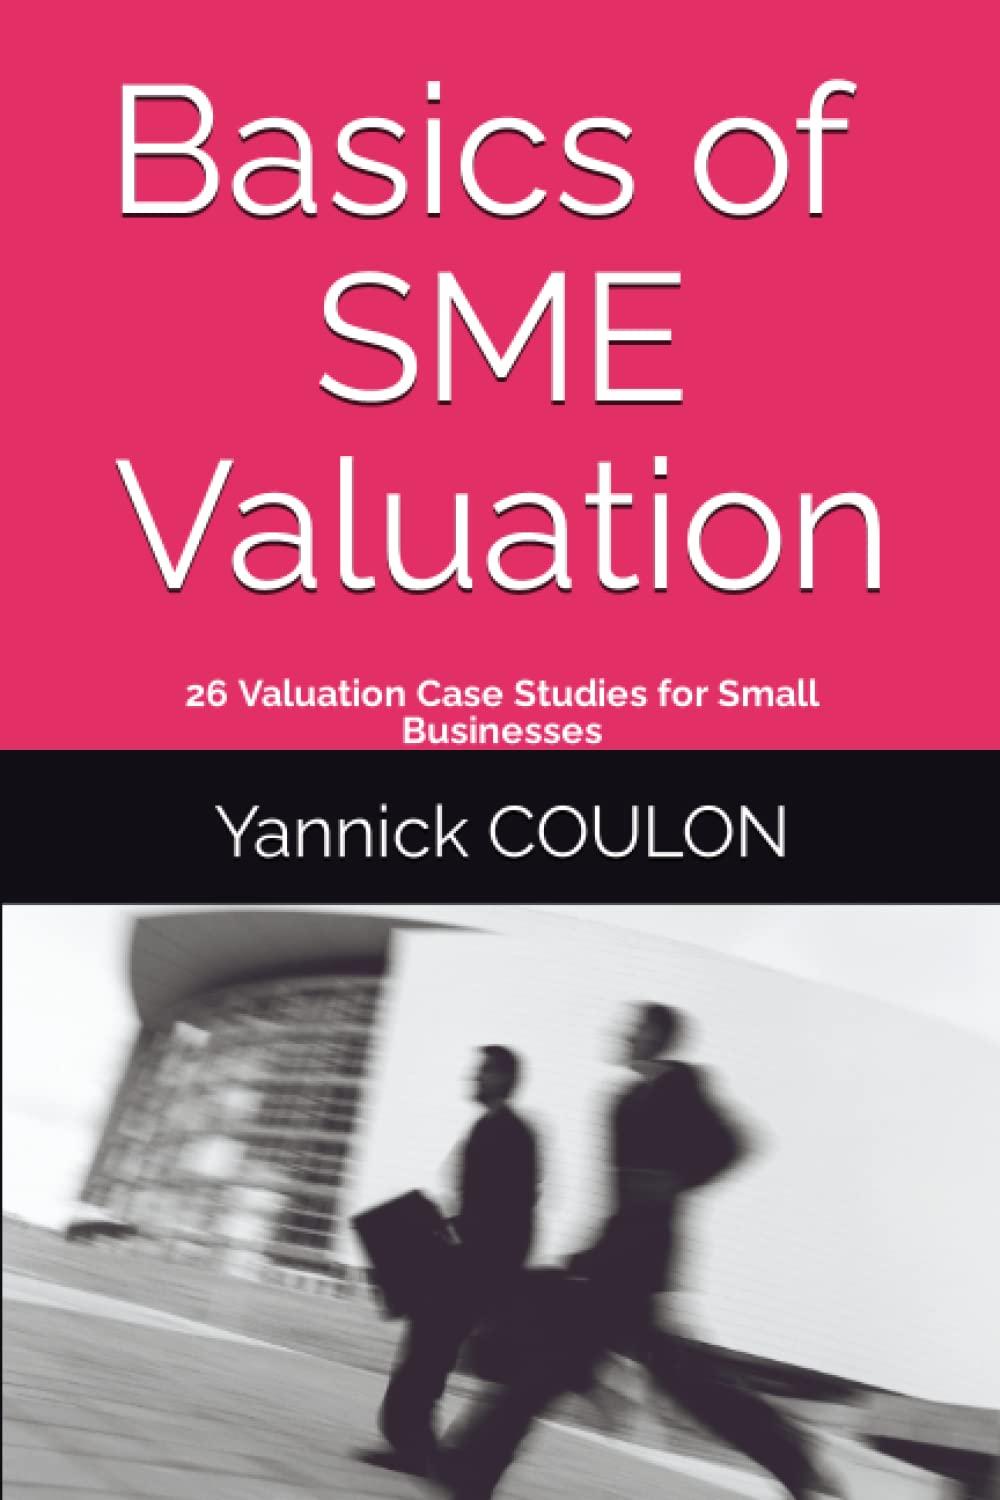 Basics Of SME Valuation 26 Valuation Case Studies For Small Businesses